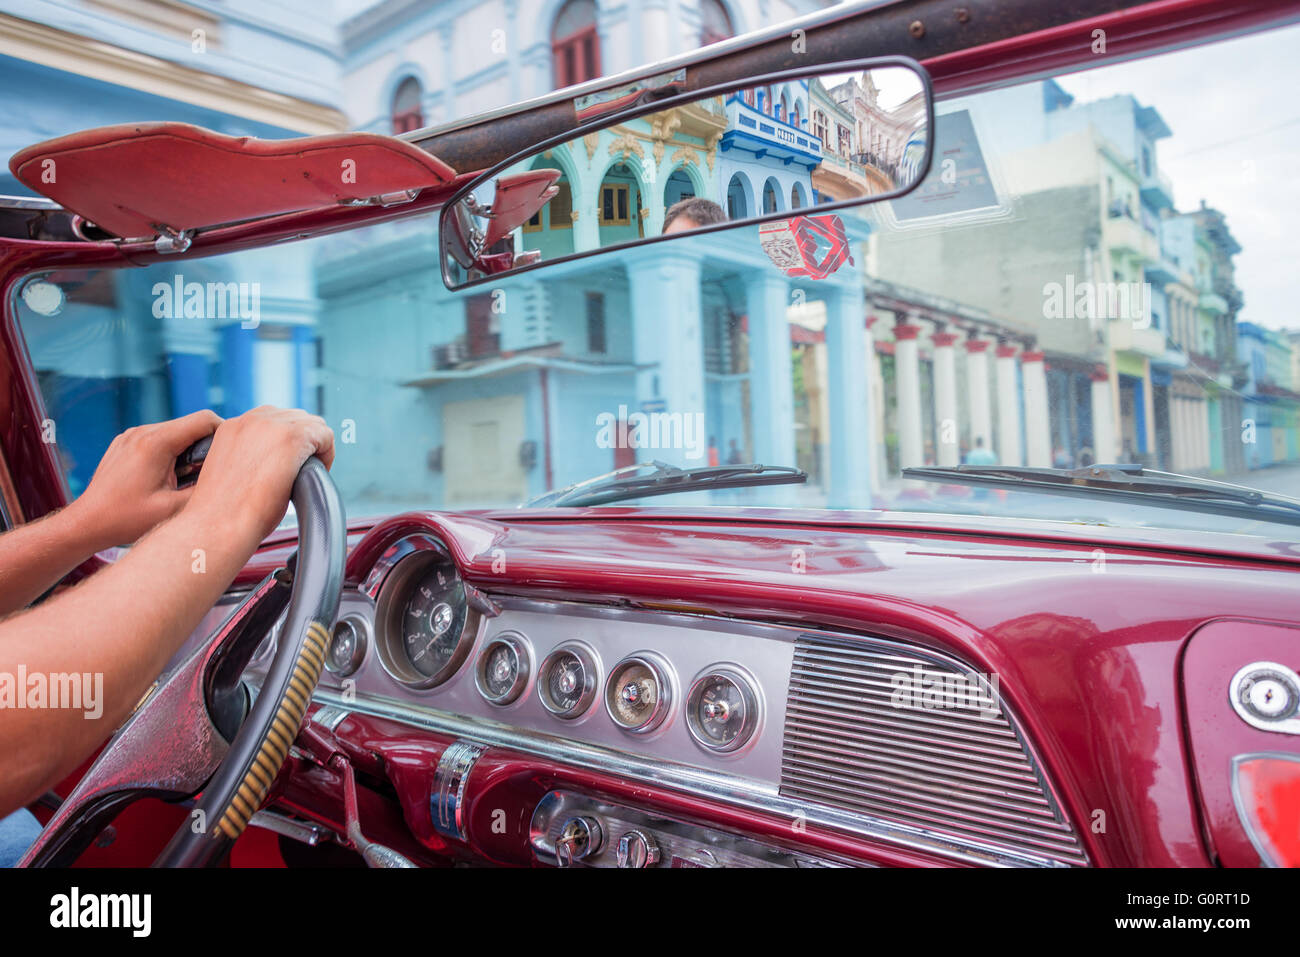 Havana, view from inside an old vintage classic american car, Cuba Stock Photo